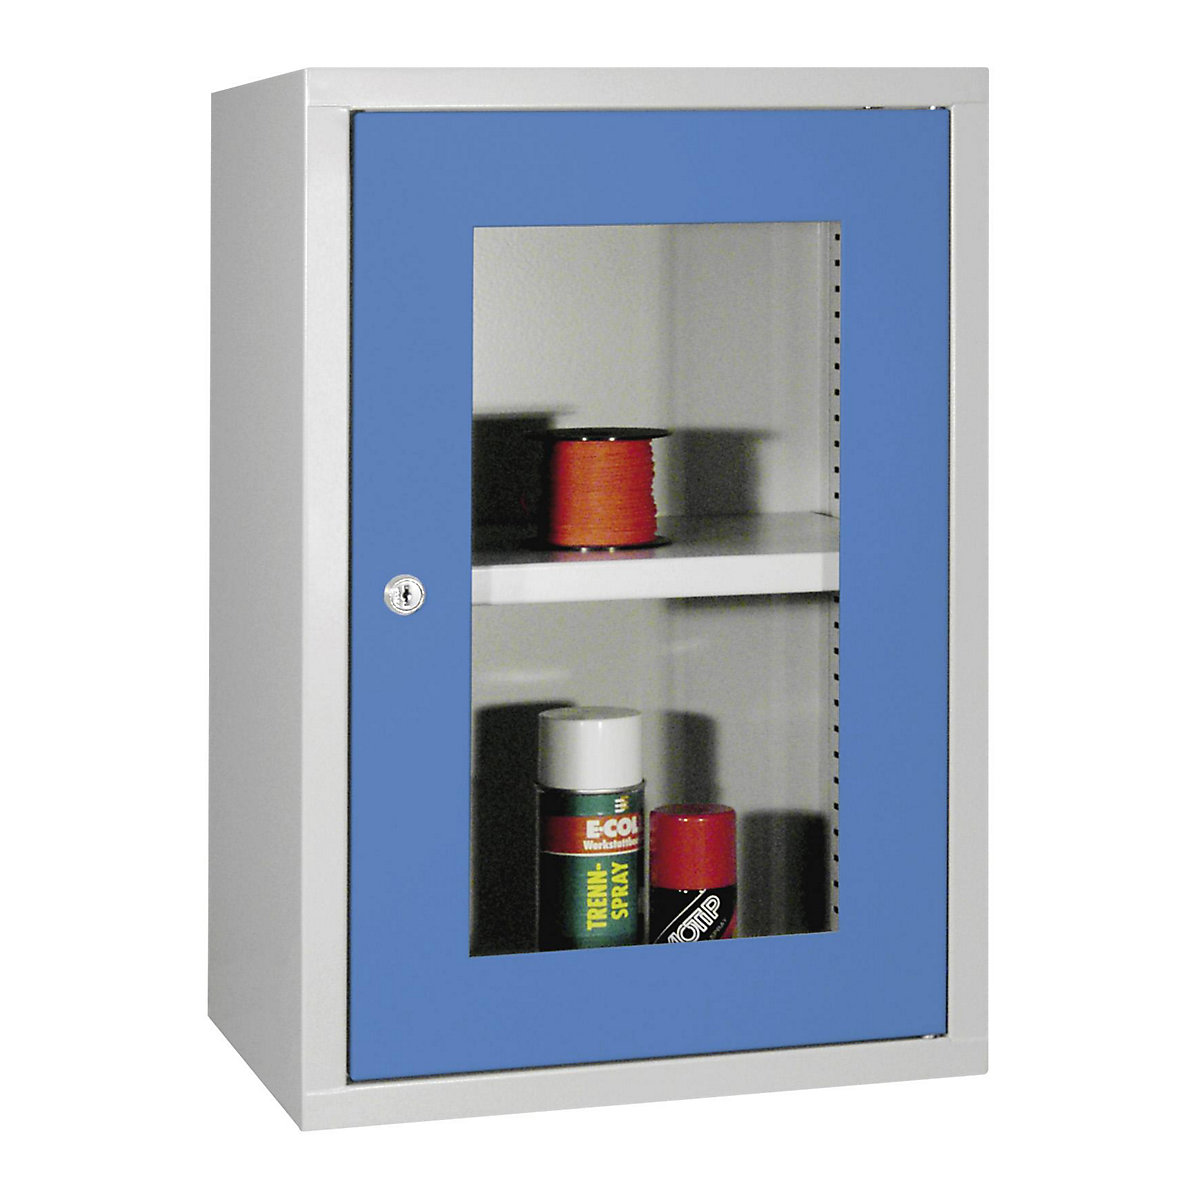 Wall mounted cupboard, height 600 mm – Pavoy, with vision panel door/s, width 400 mm, solid rear panel, grey / blue-7